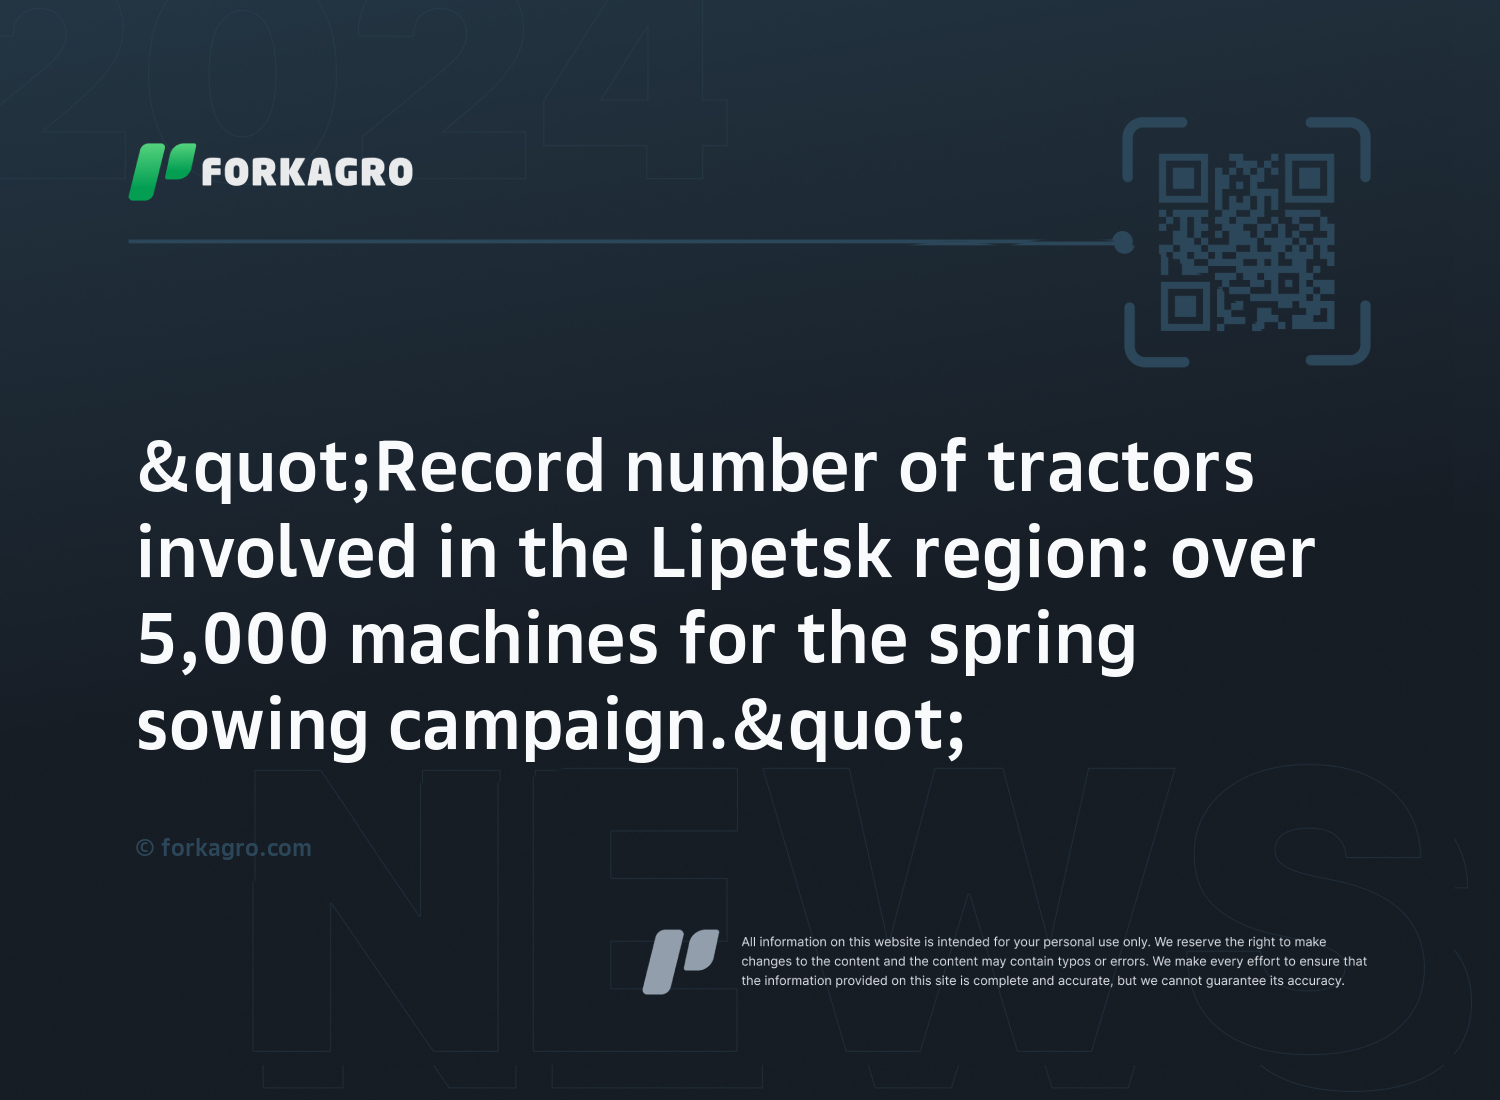 "Record number of tractors involved in the Lipetsk region: over 5,000 machines for the spring sowing campaign."